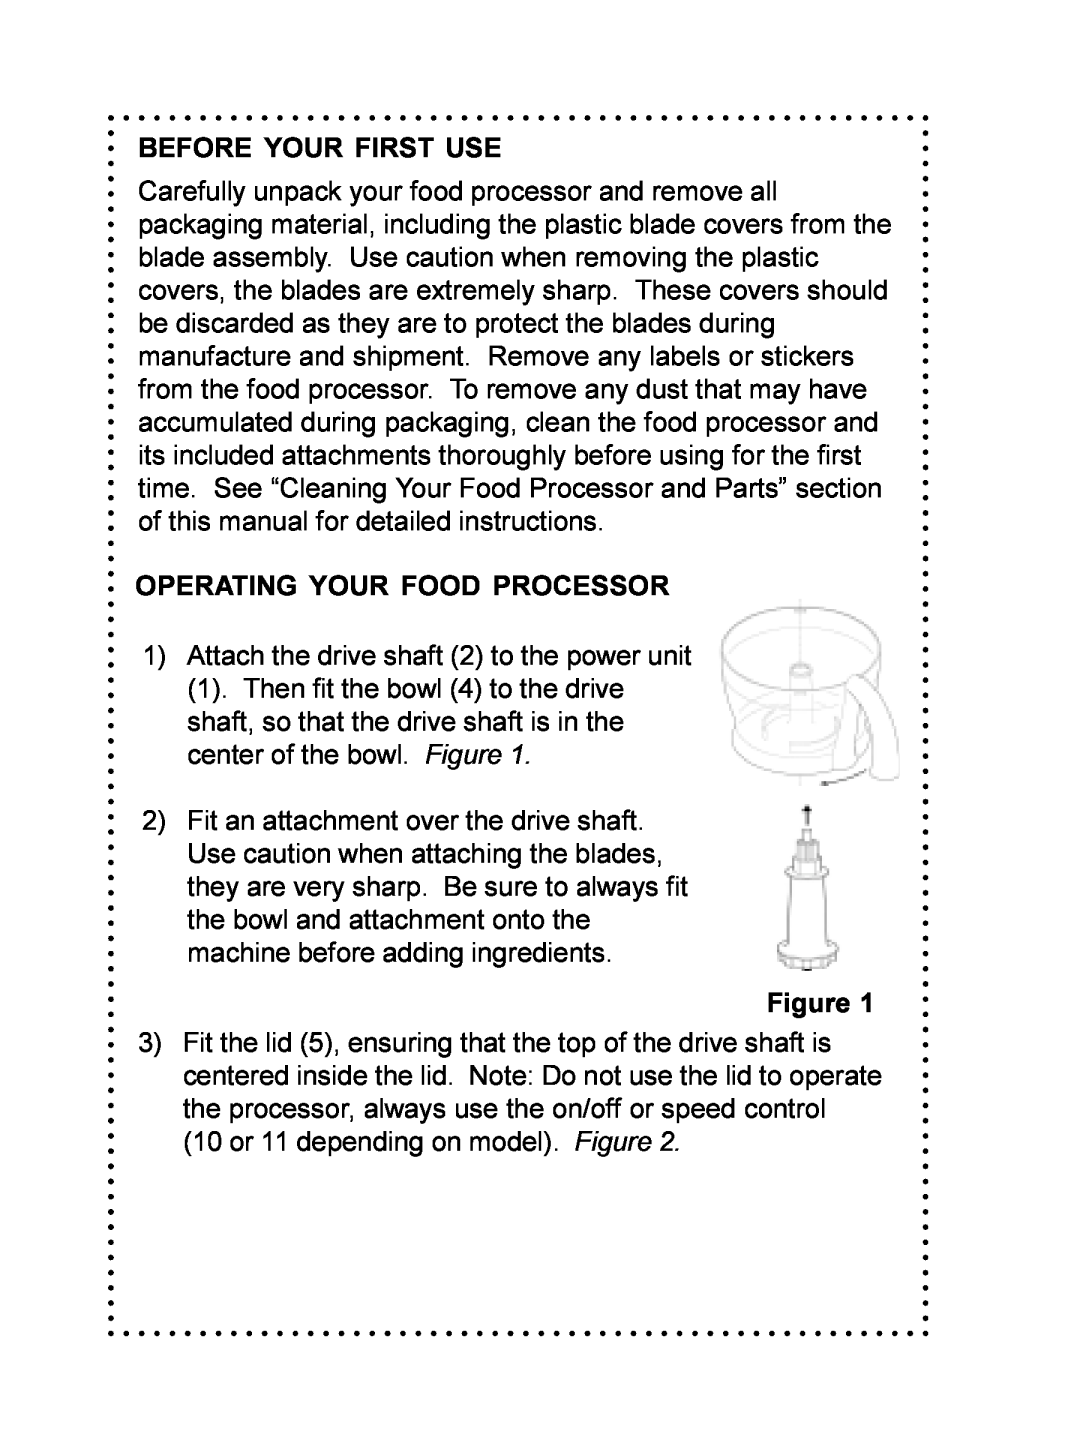 DeLonghi DFP690 Series instruction manual Before Your First Use, Operating Your Food Processor 